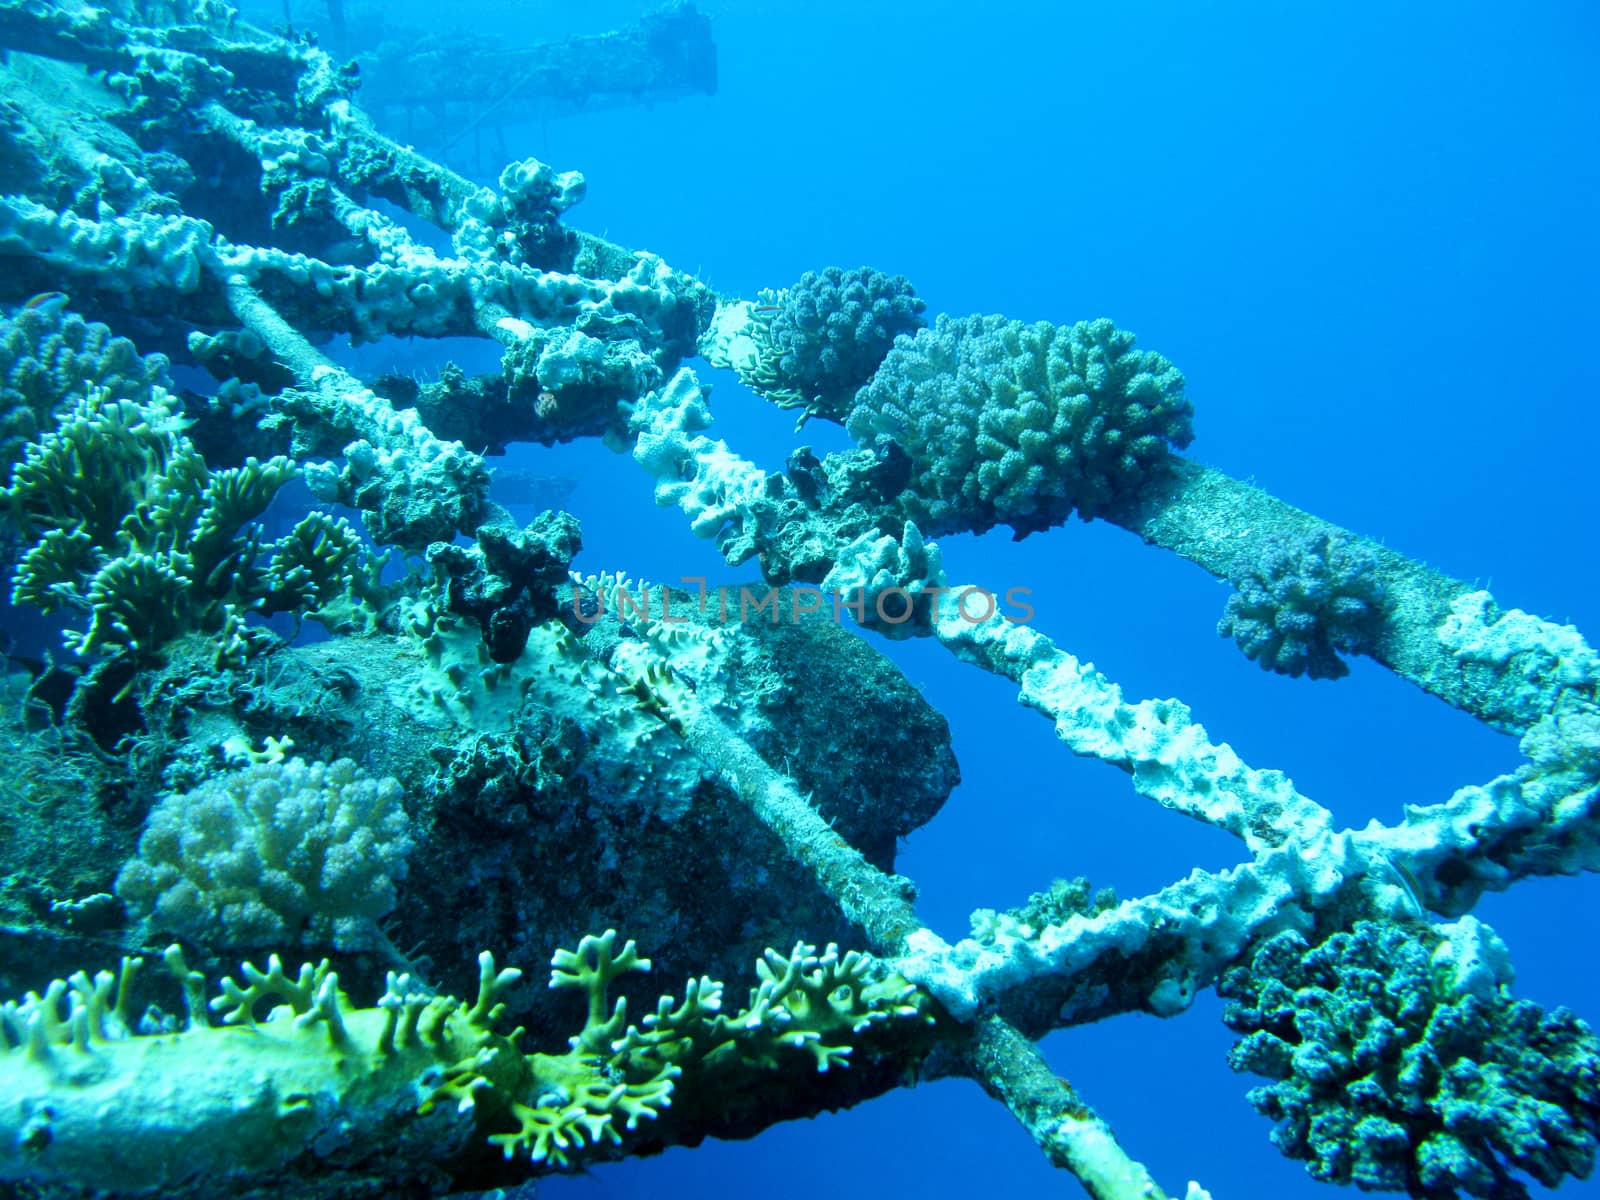 
Fragment shipwreck with reef coral on the bottom,  great depth, underwater

